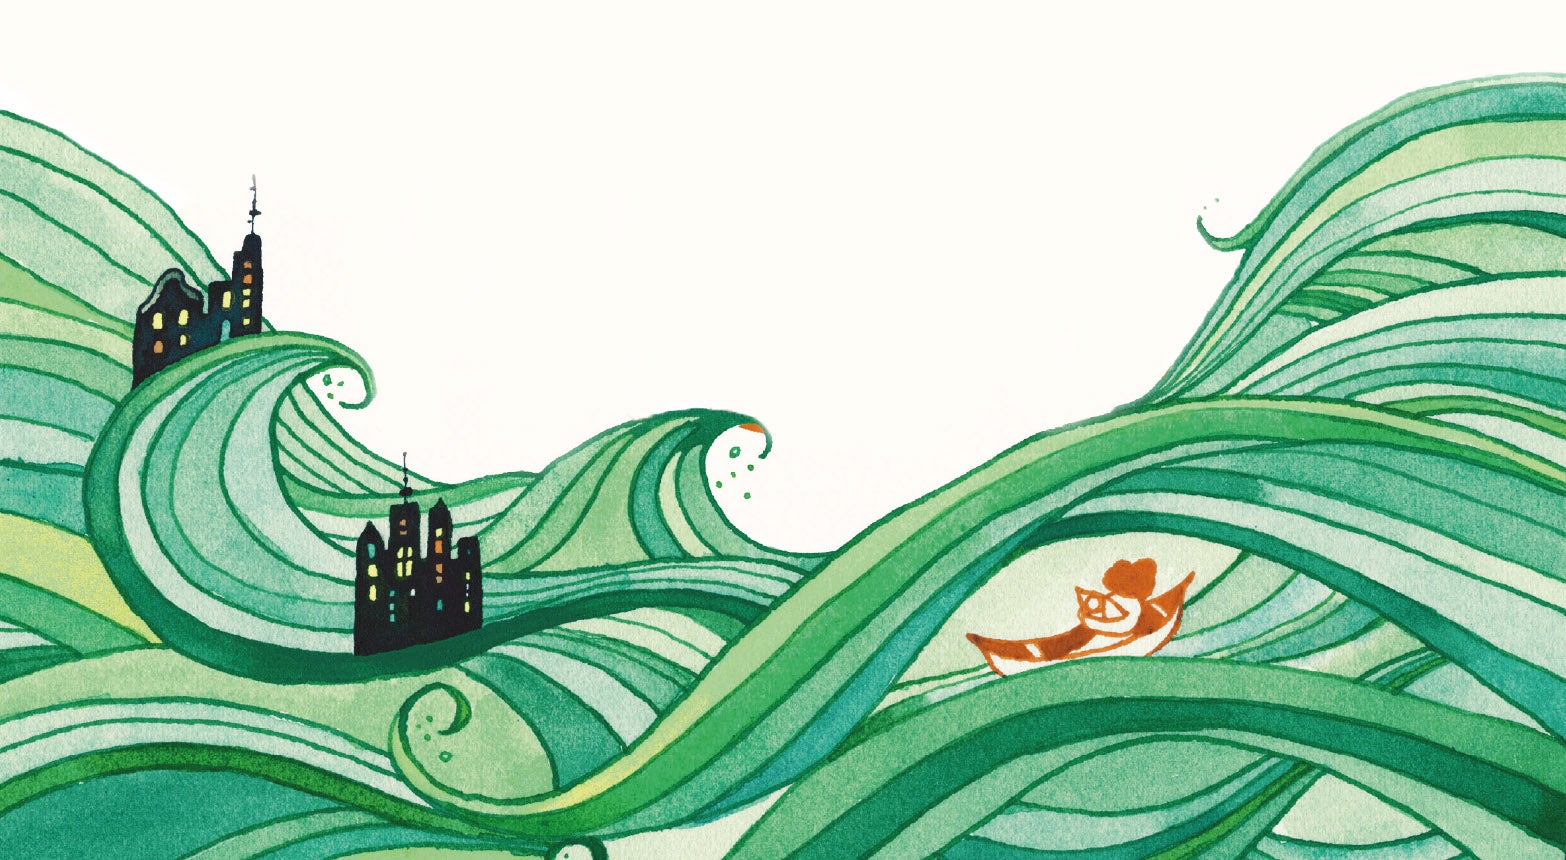 Illustration of a city underwater with a boat sailing away, taken from the cover of The End We Start From.